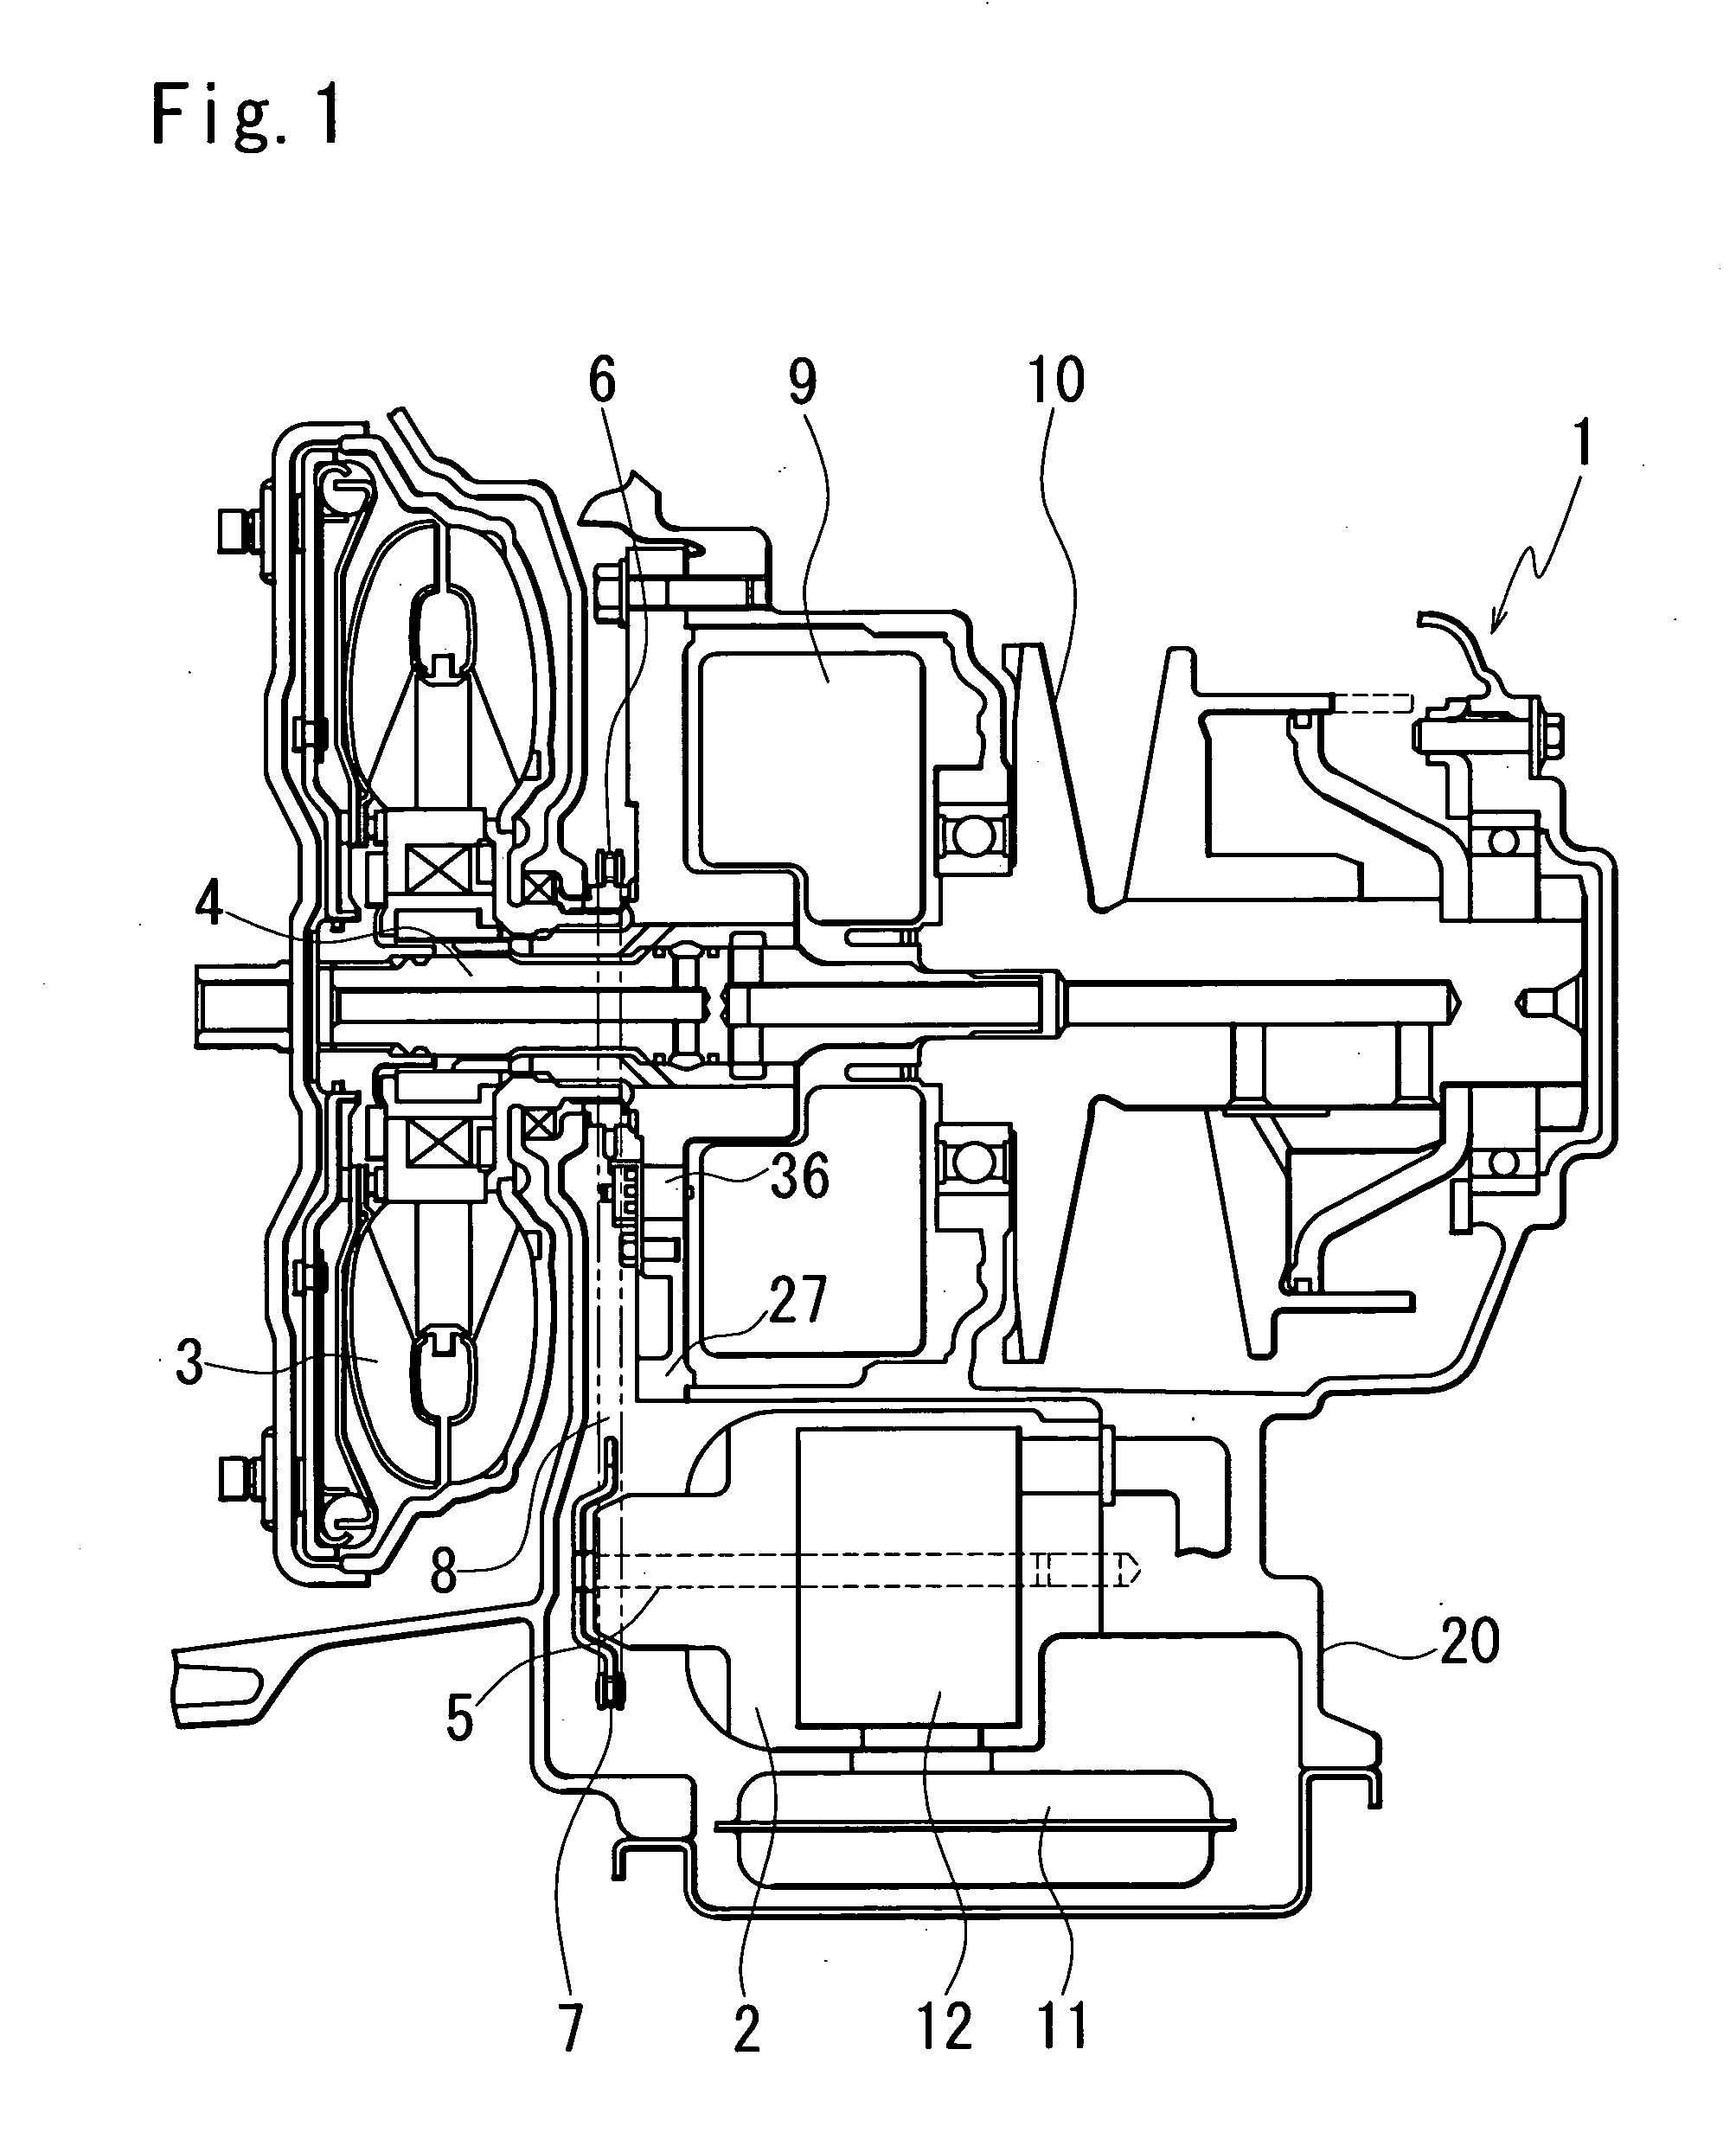 Oil pump supporting structure of automatic transmission